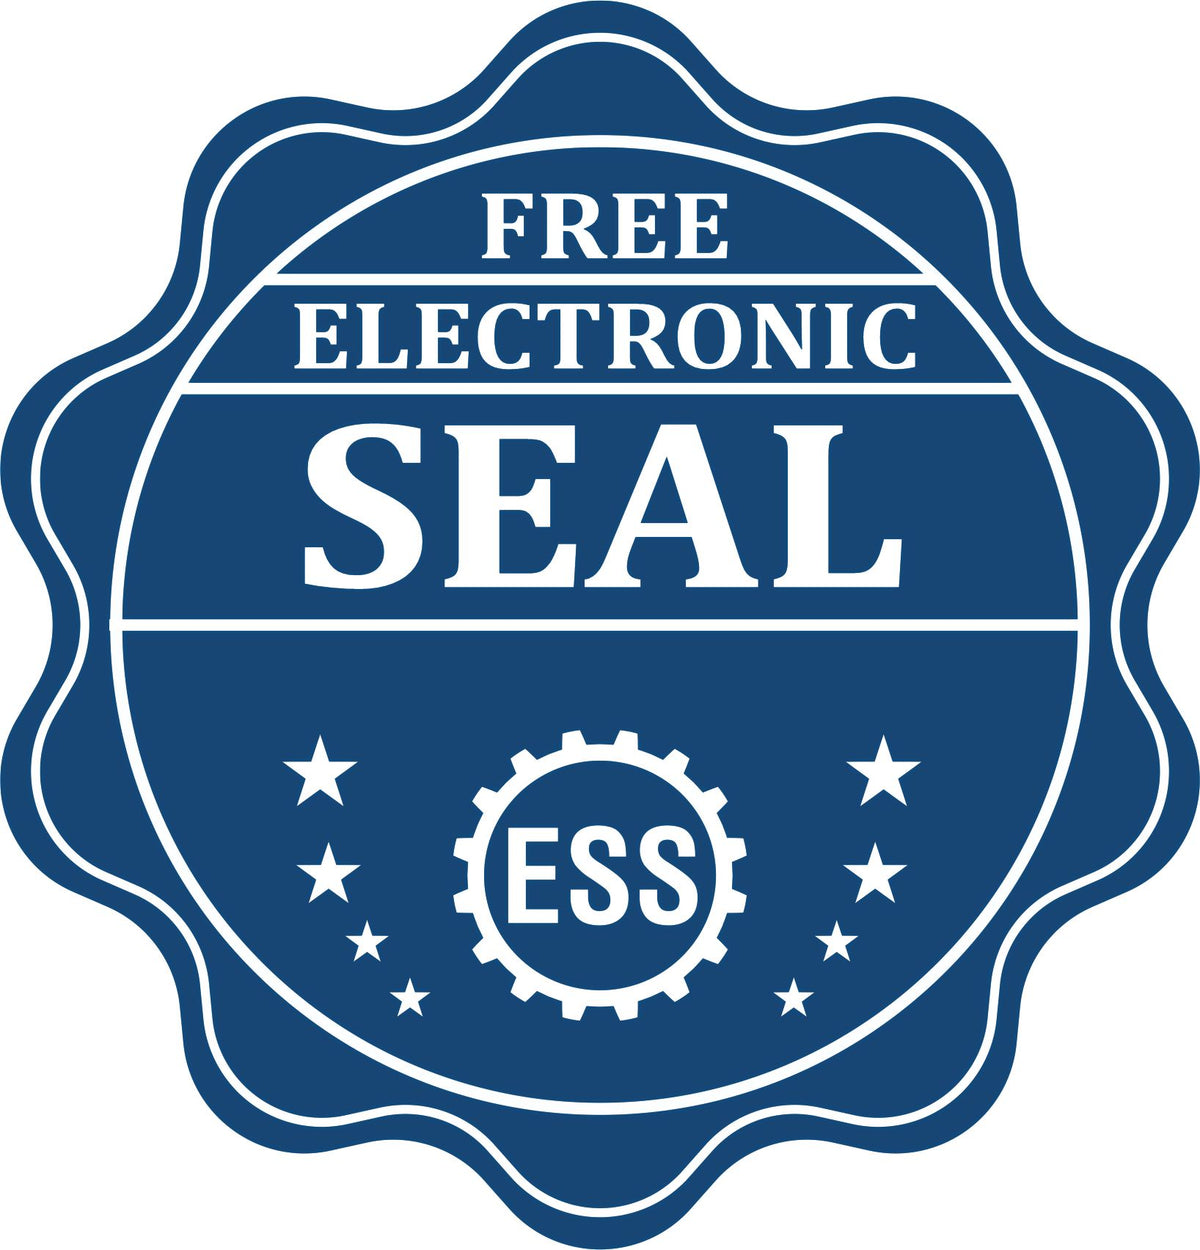 A badge showing a free electronic seal for the New York Geologist Desk Seal with stars and the ESS gear on the emblem.